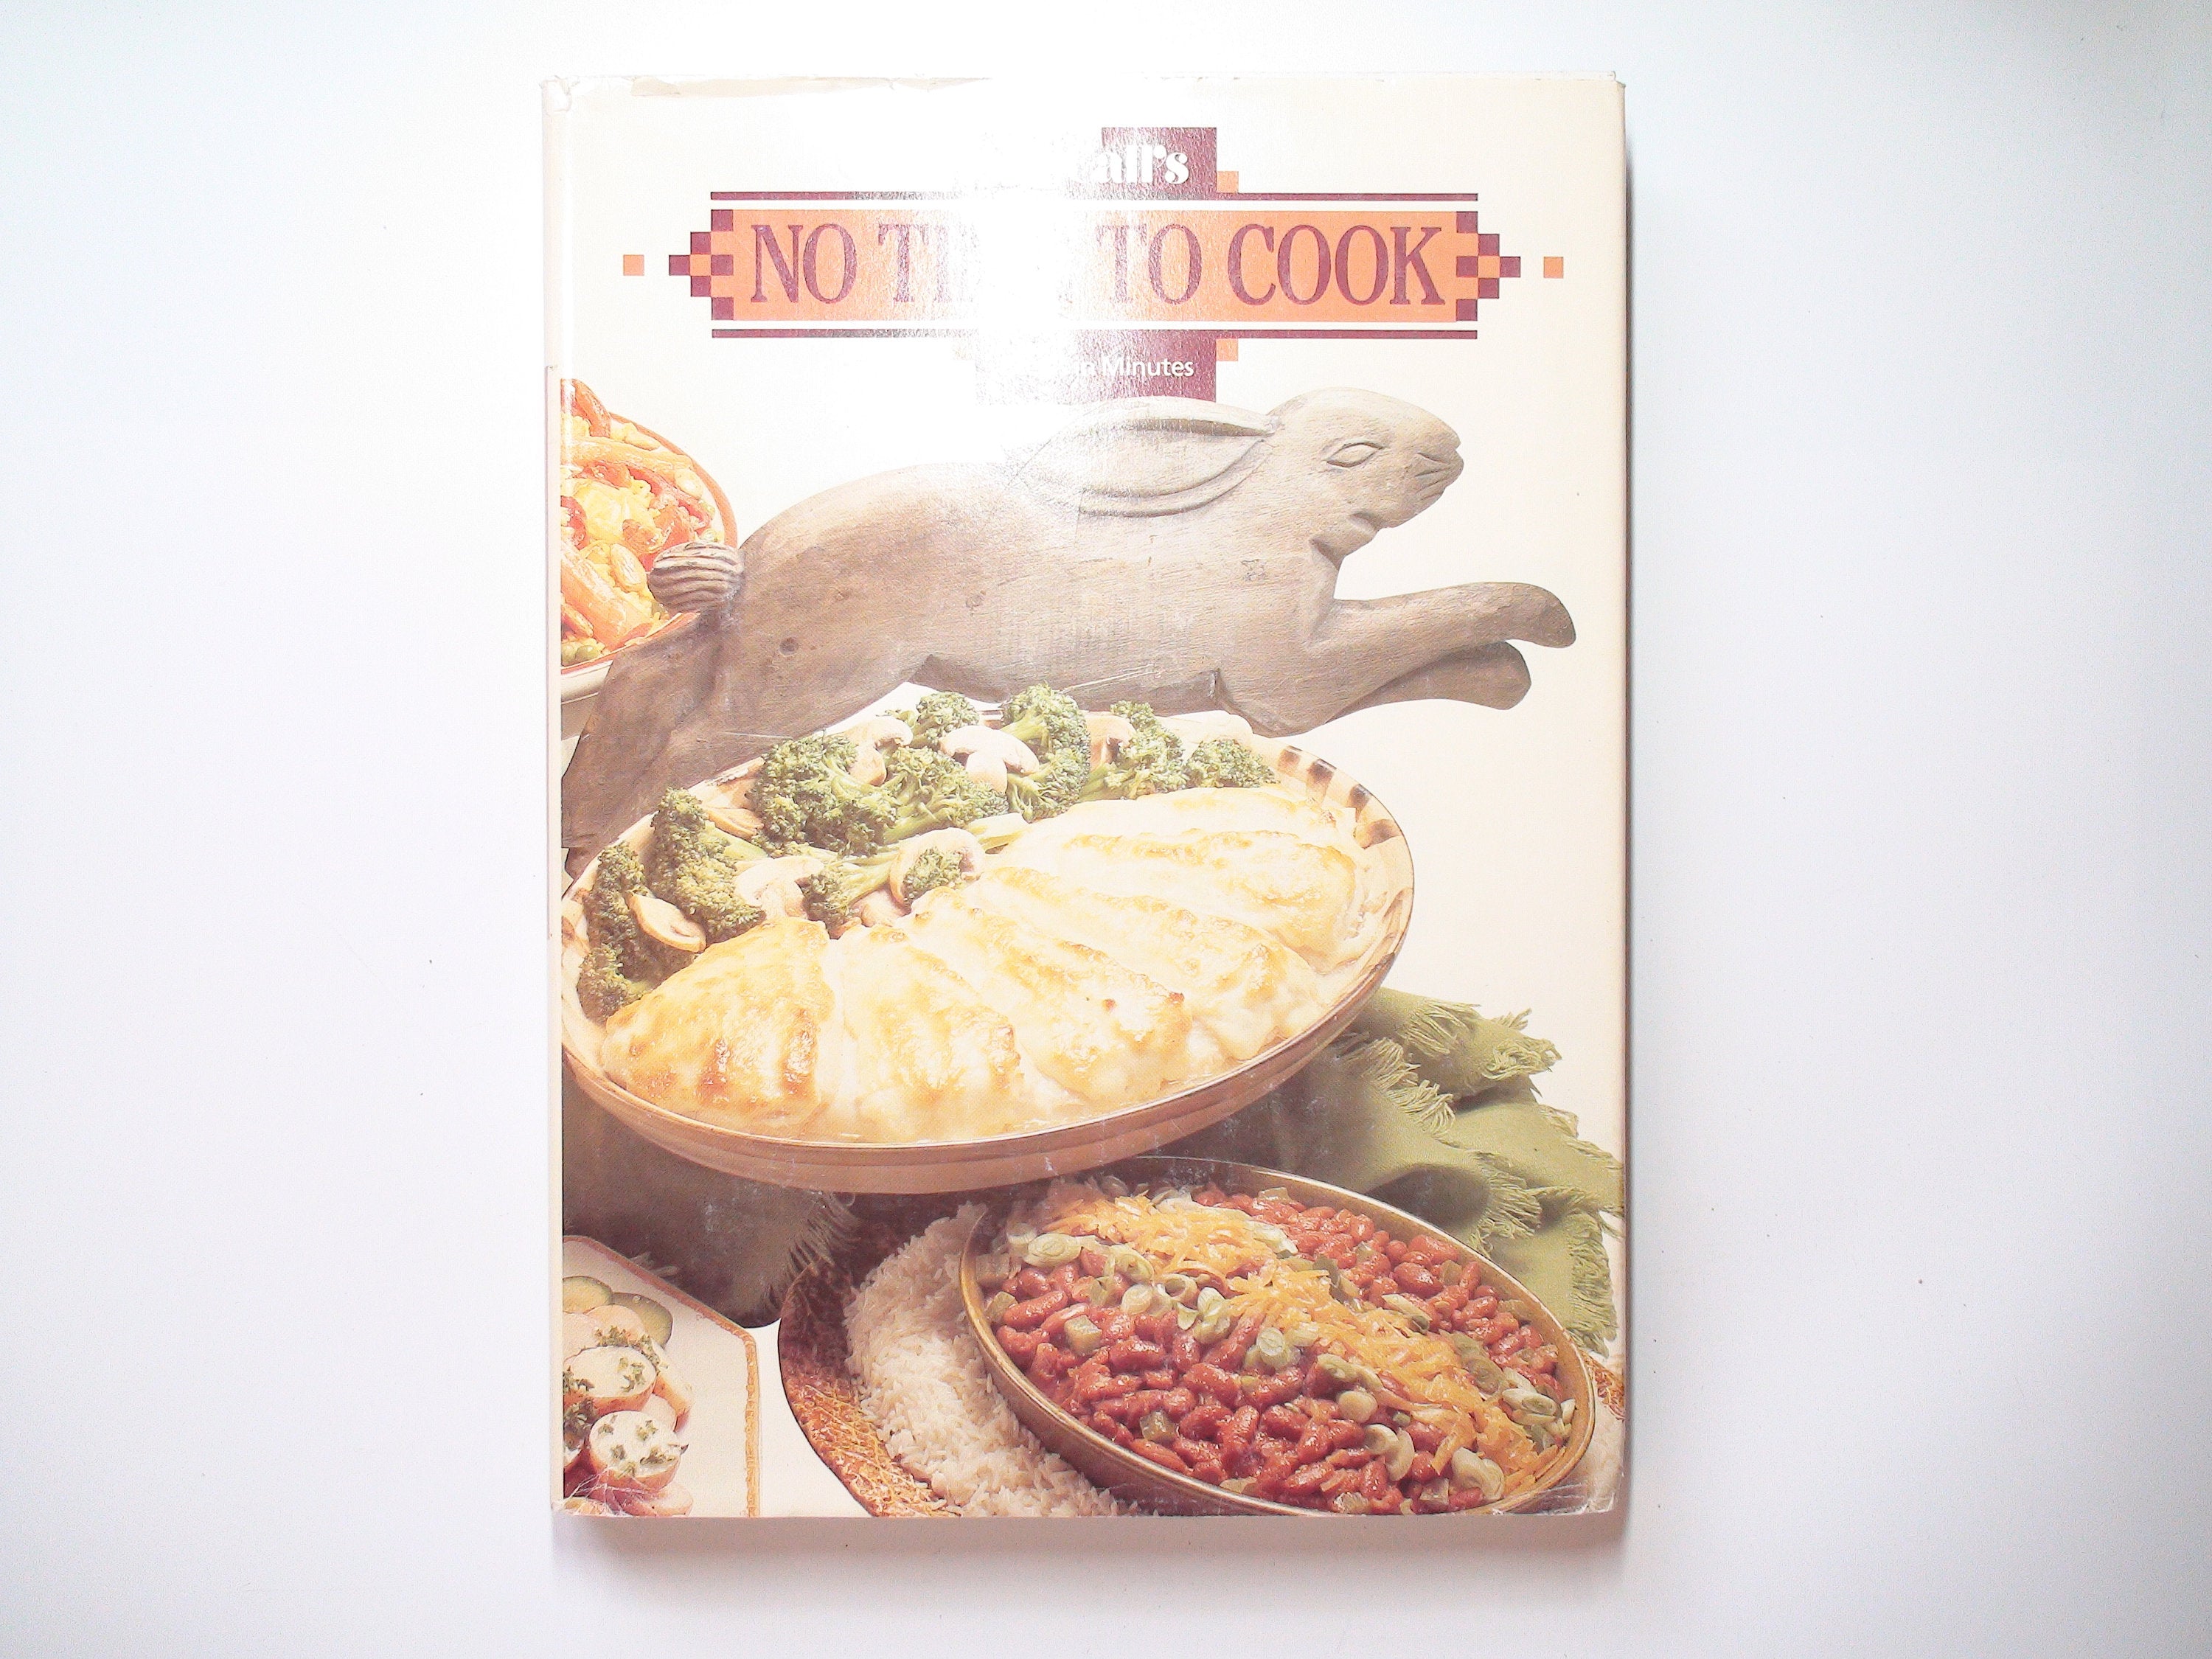 No Time to Cook, Elaine Prescott Wansavage, McCall's, 1st Ed, Illustrated, 1985